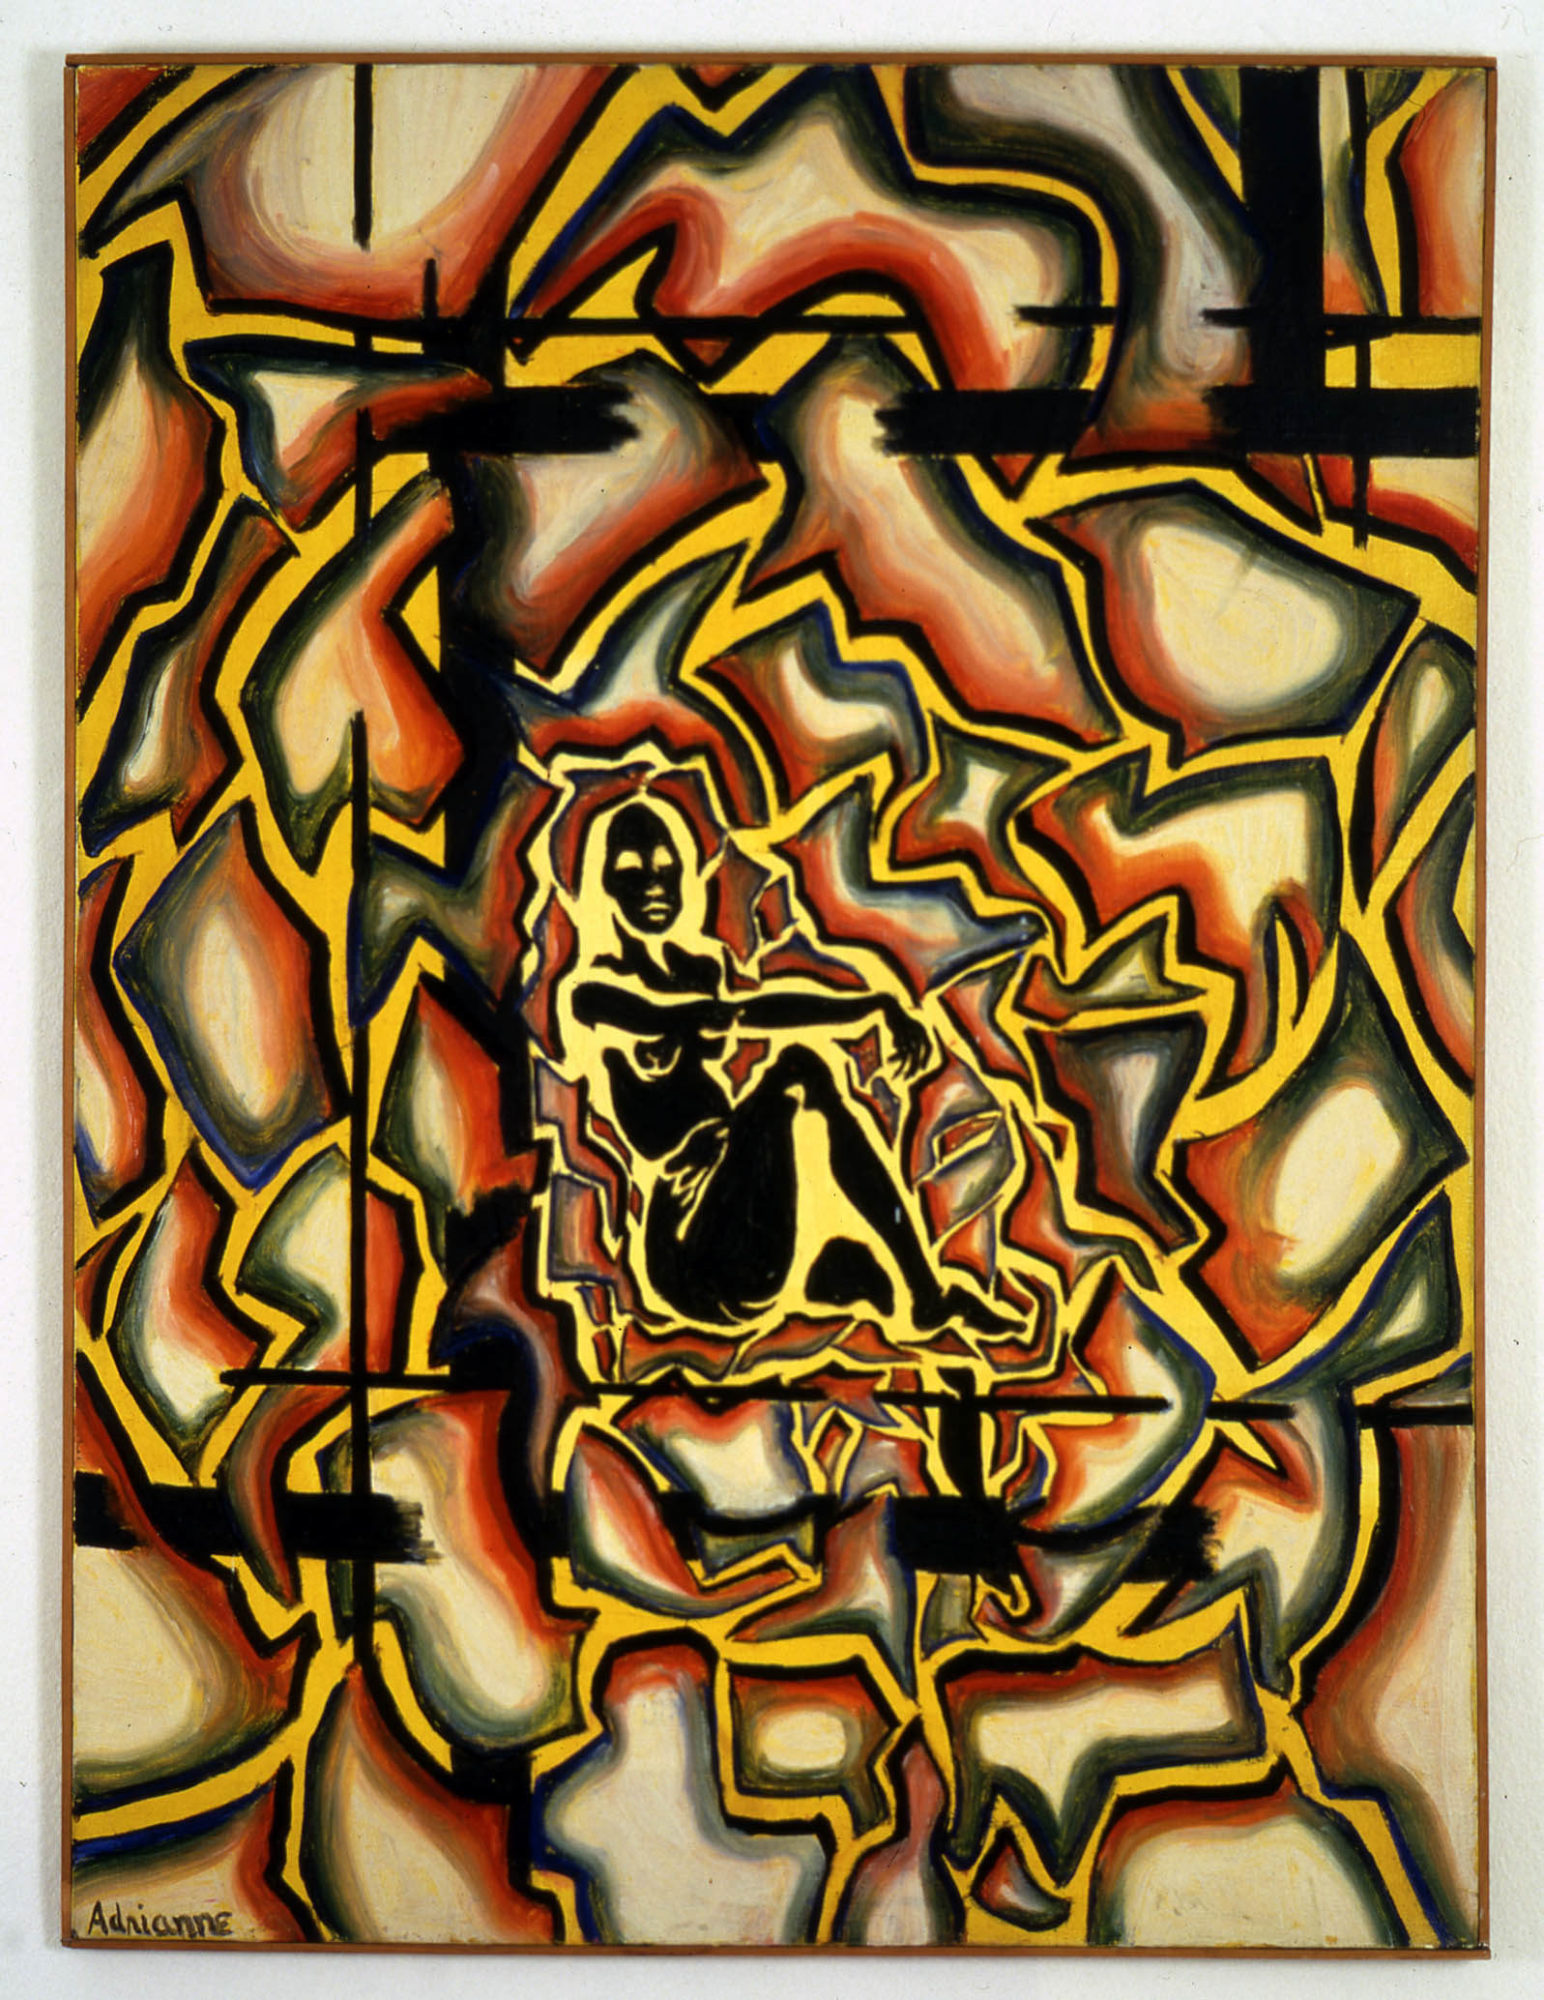 A painting of a nude woman rendered simply in black and yellow. Zig-zag, lightning bolt-like lines of yellow/red emanate outward from her.